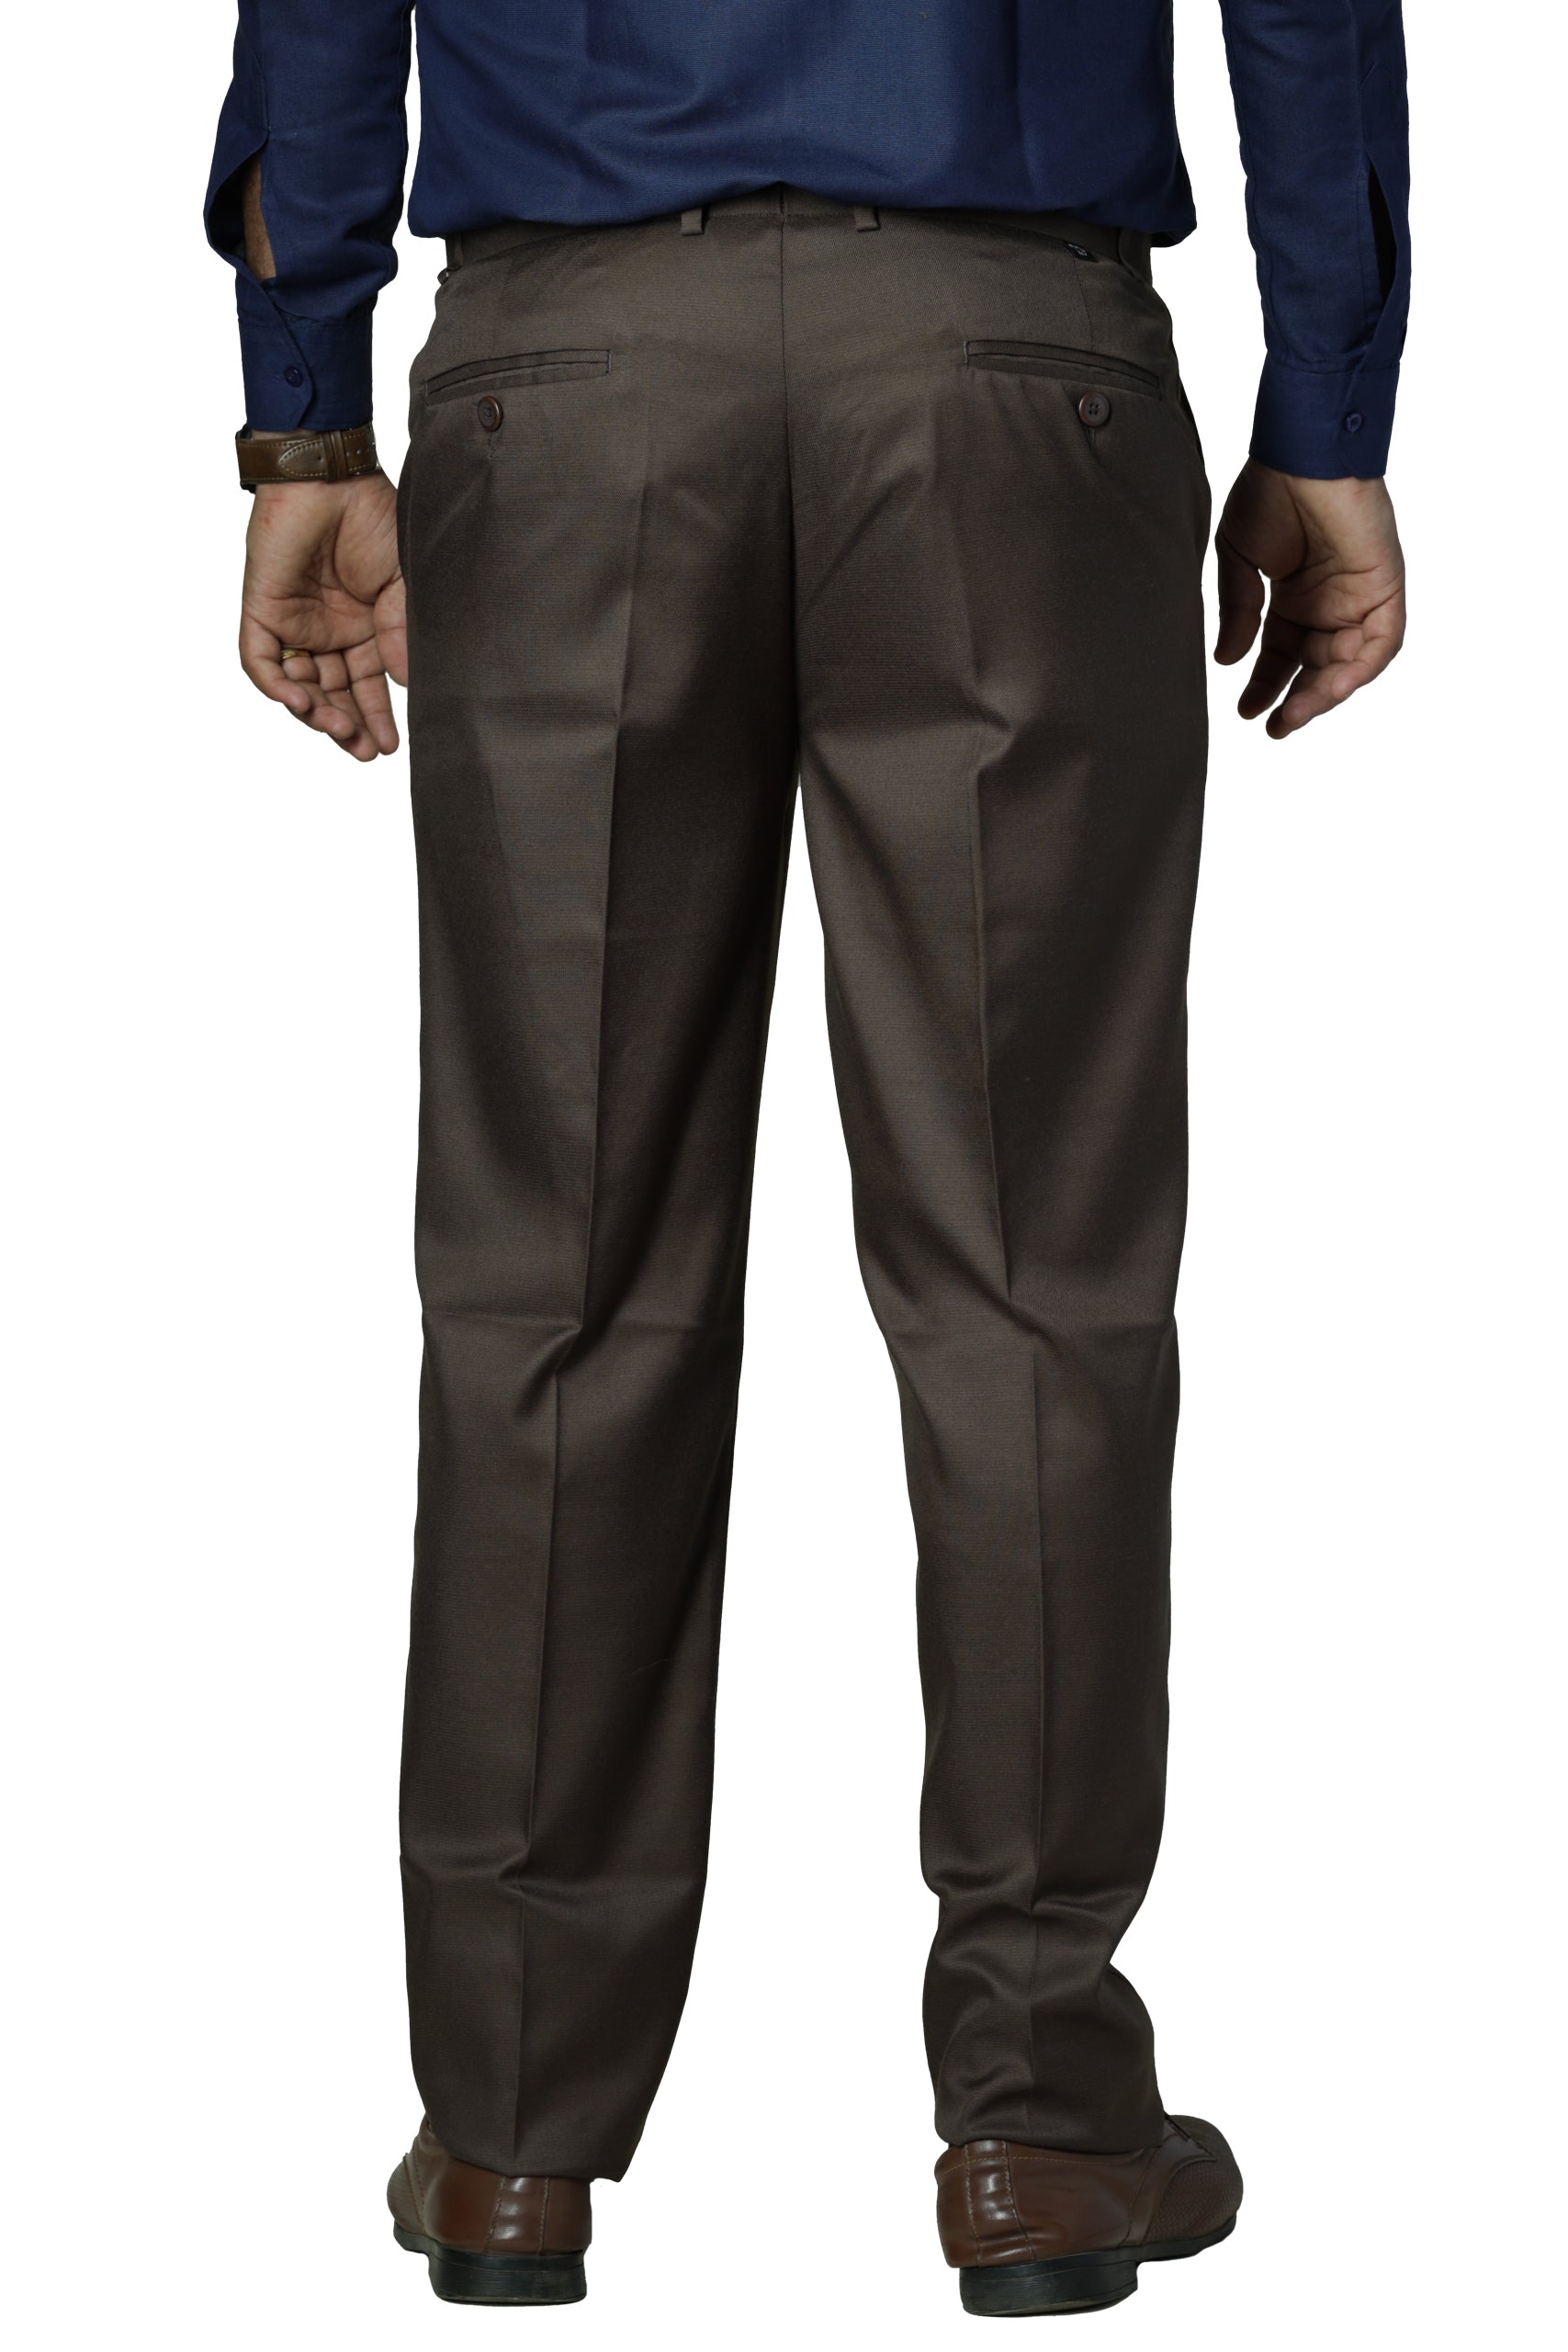 Flexiplus Straight Fit Pants Special edition